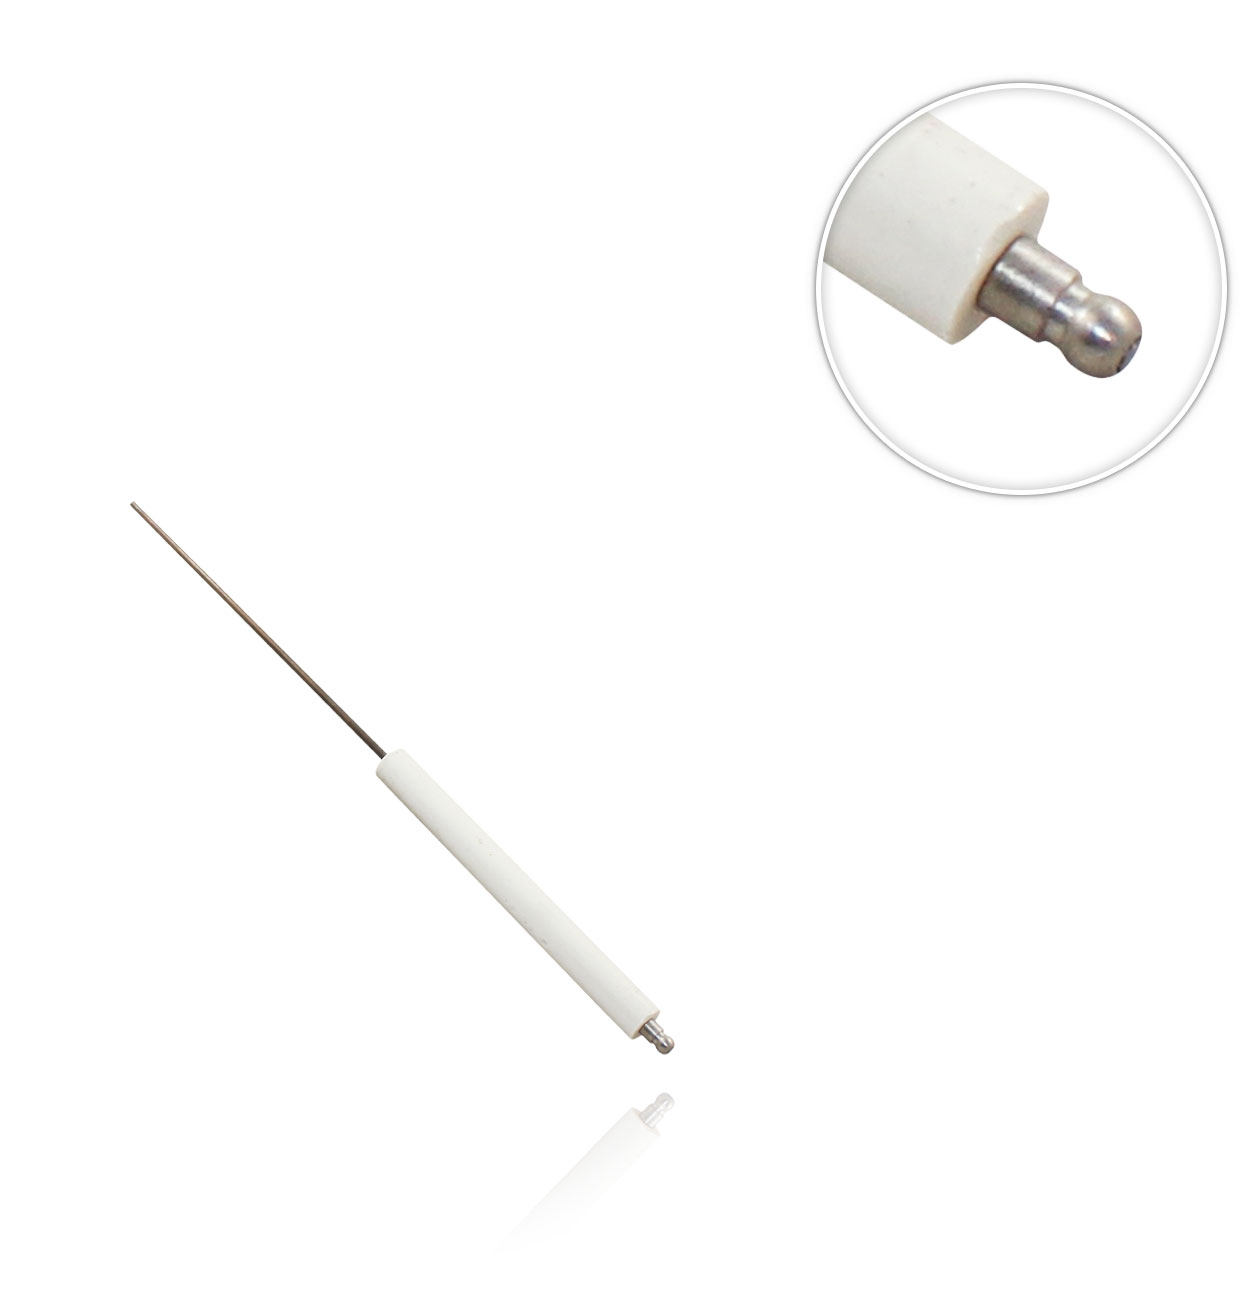 IONISATION ELECTRODE 14x125/3 x125/6,35x11mm.